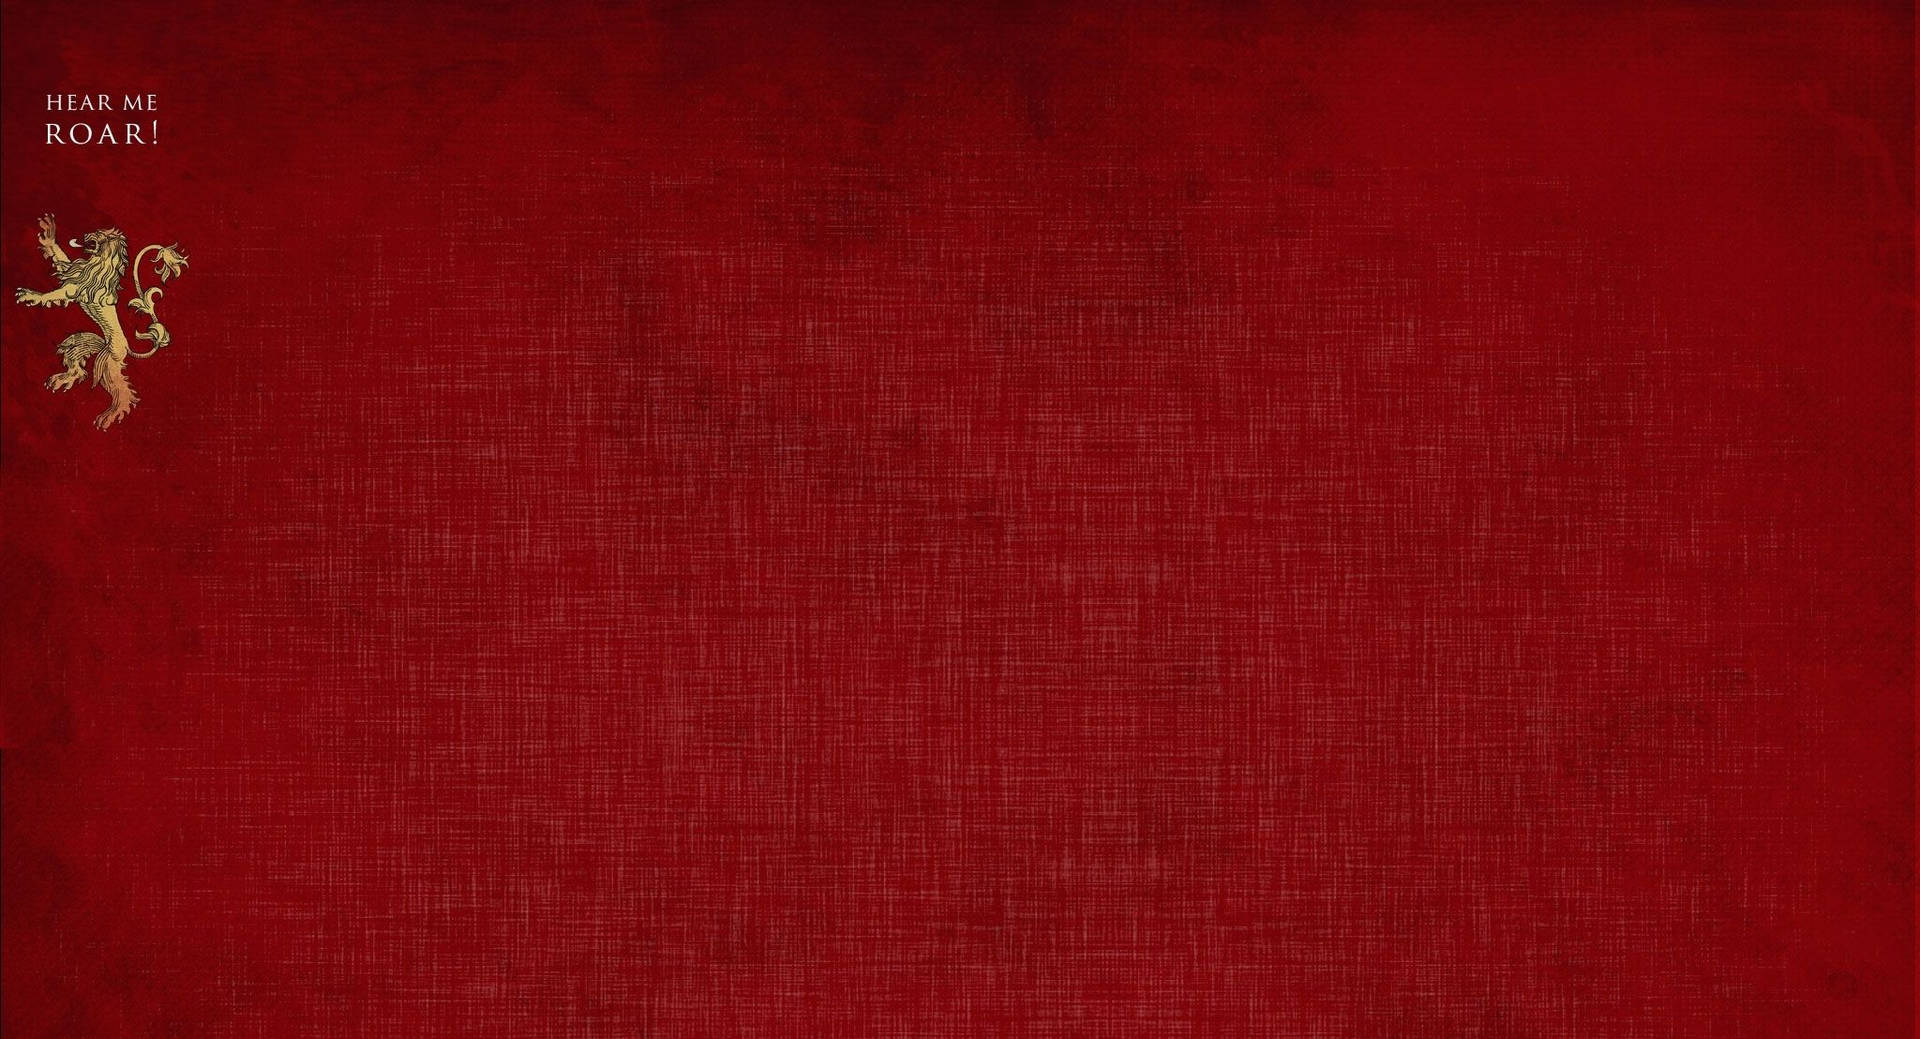 House Lannister Red Canvass Background